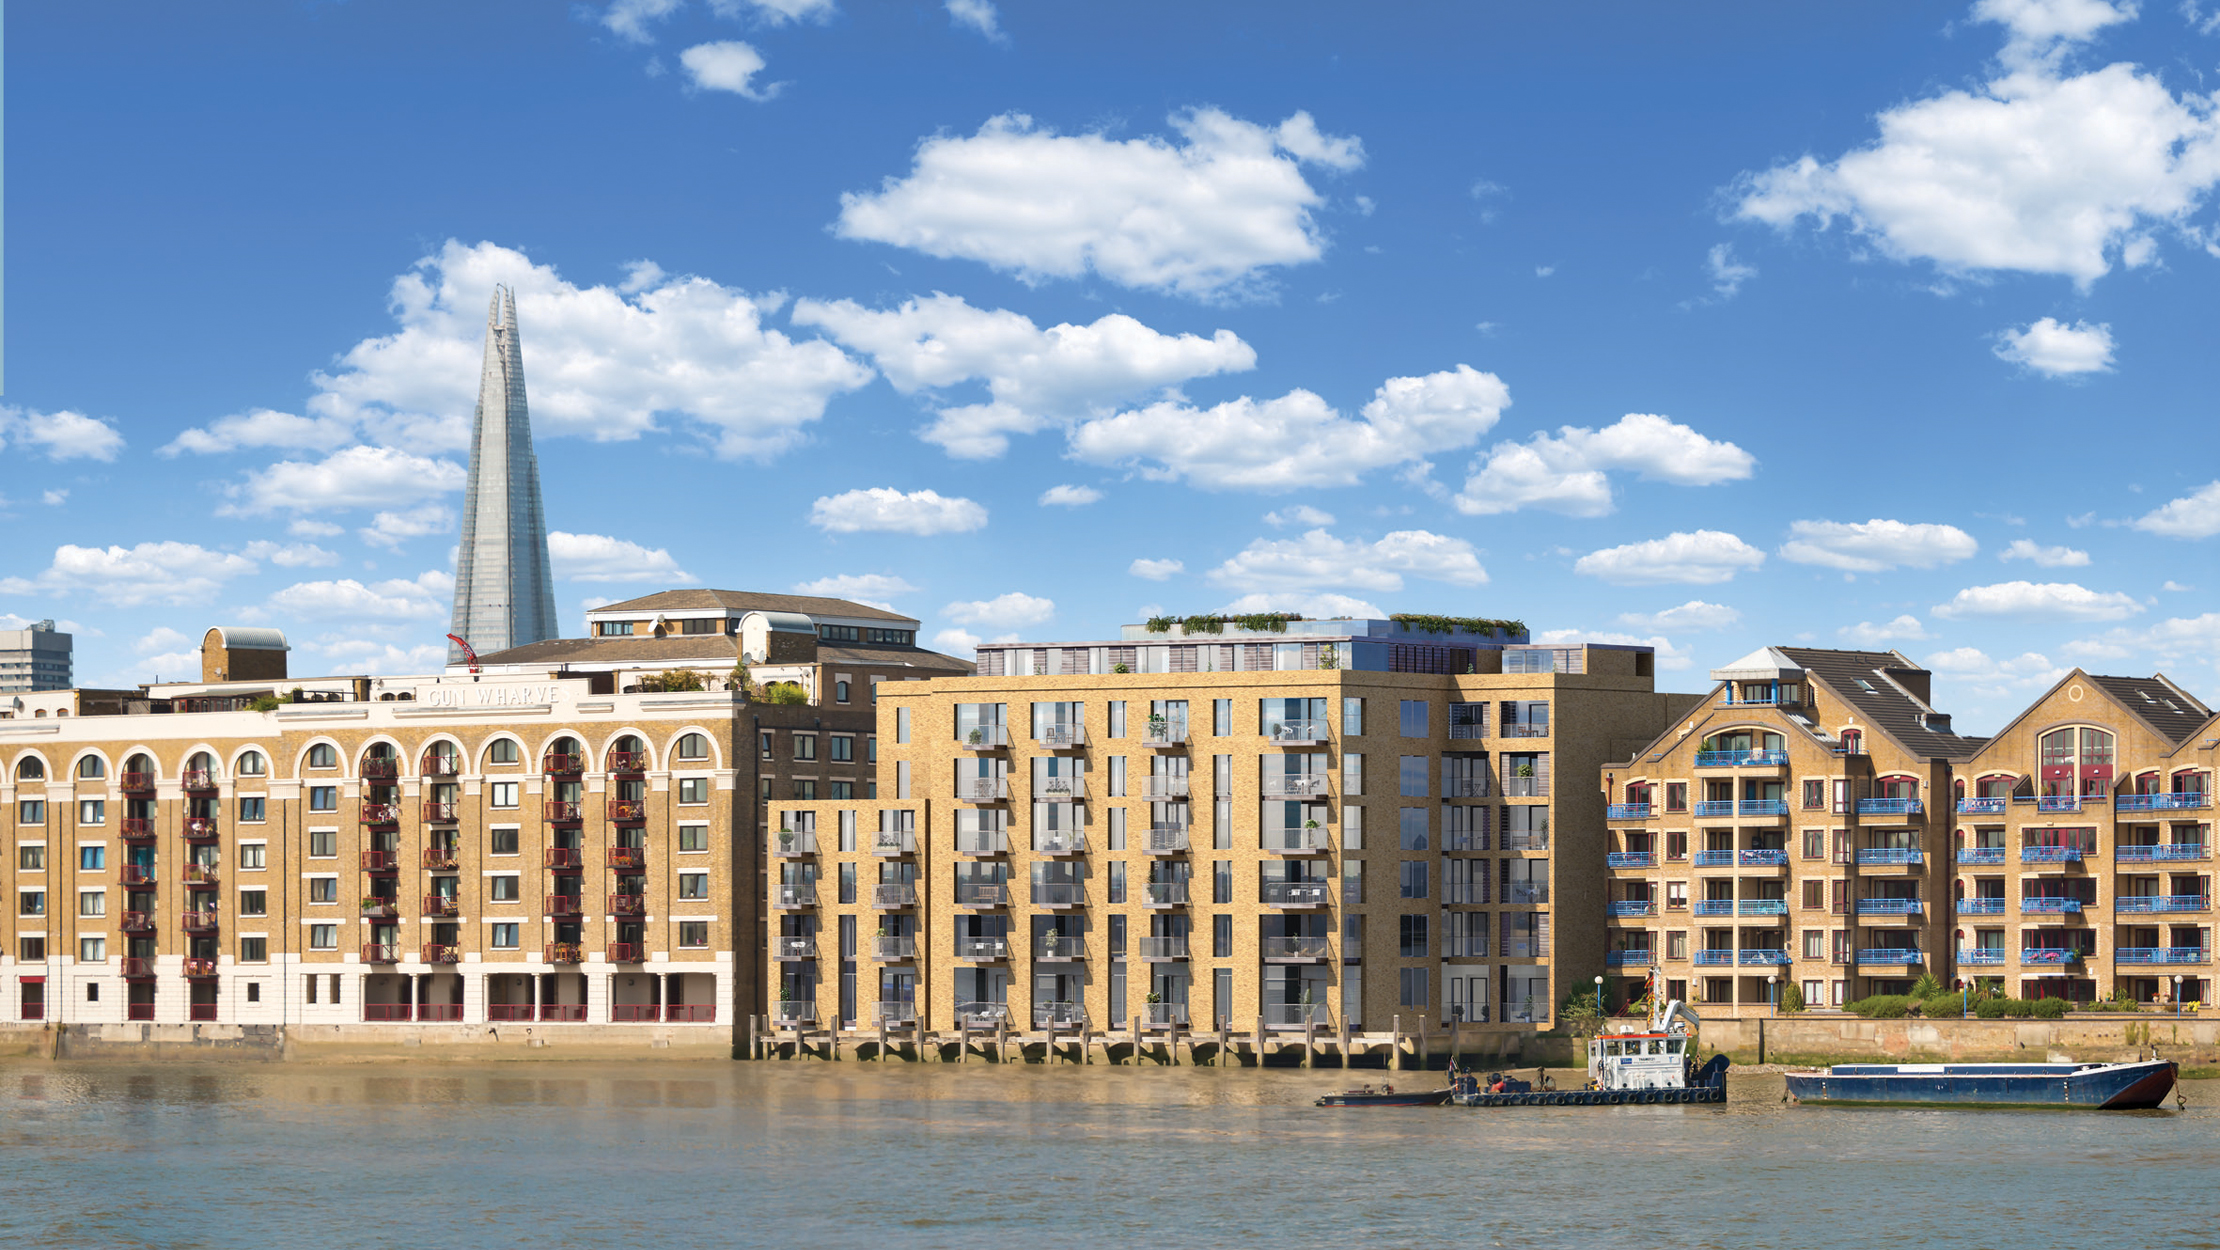 Introducing Wapping Riverside in Wapping